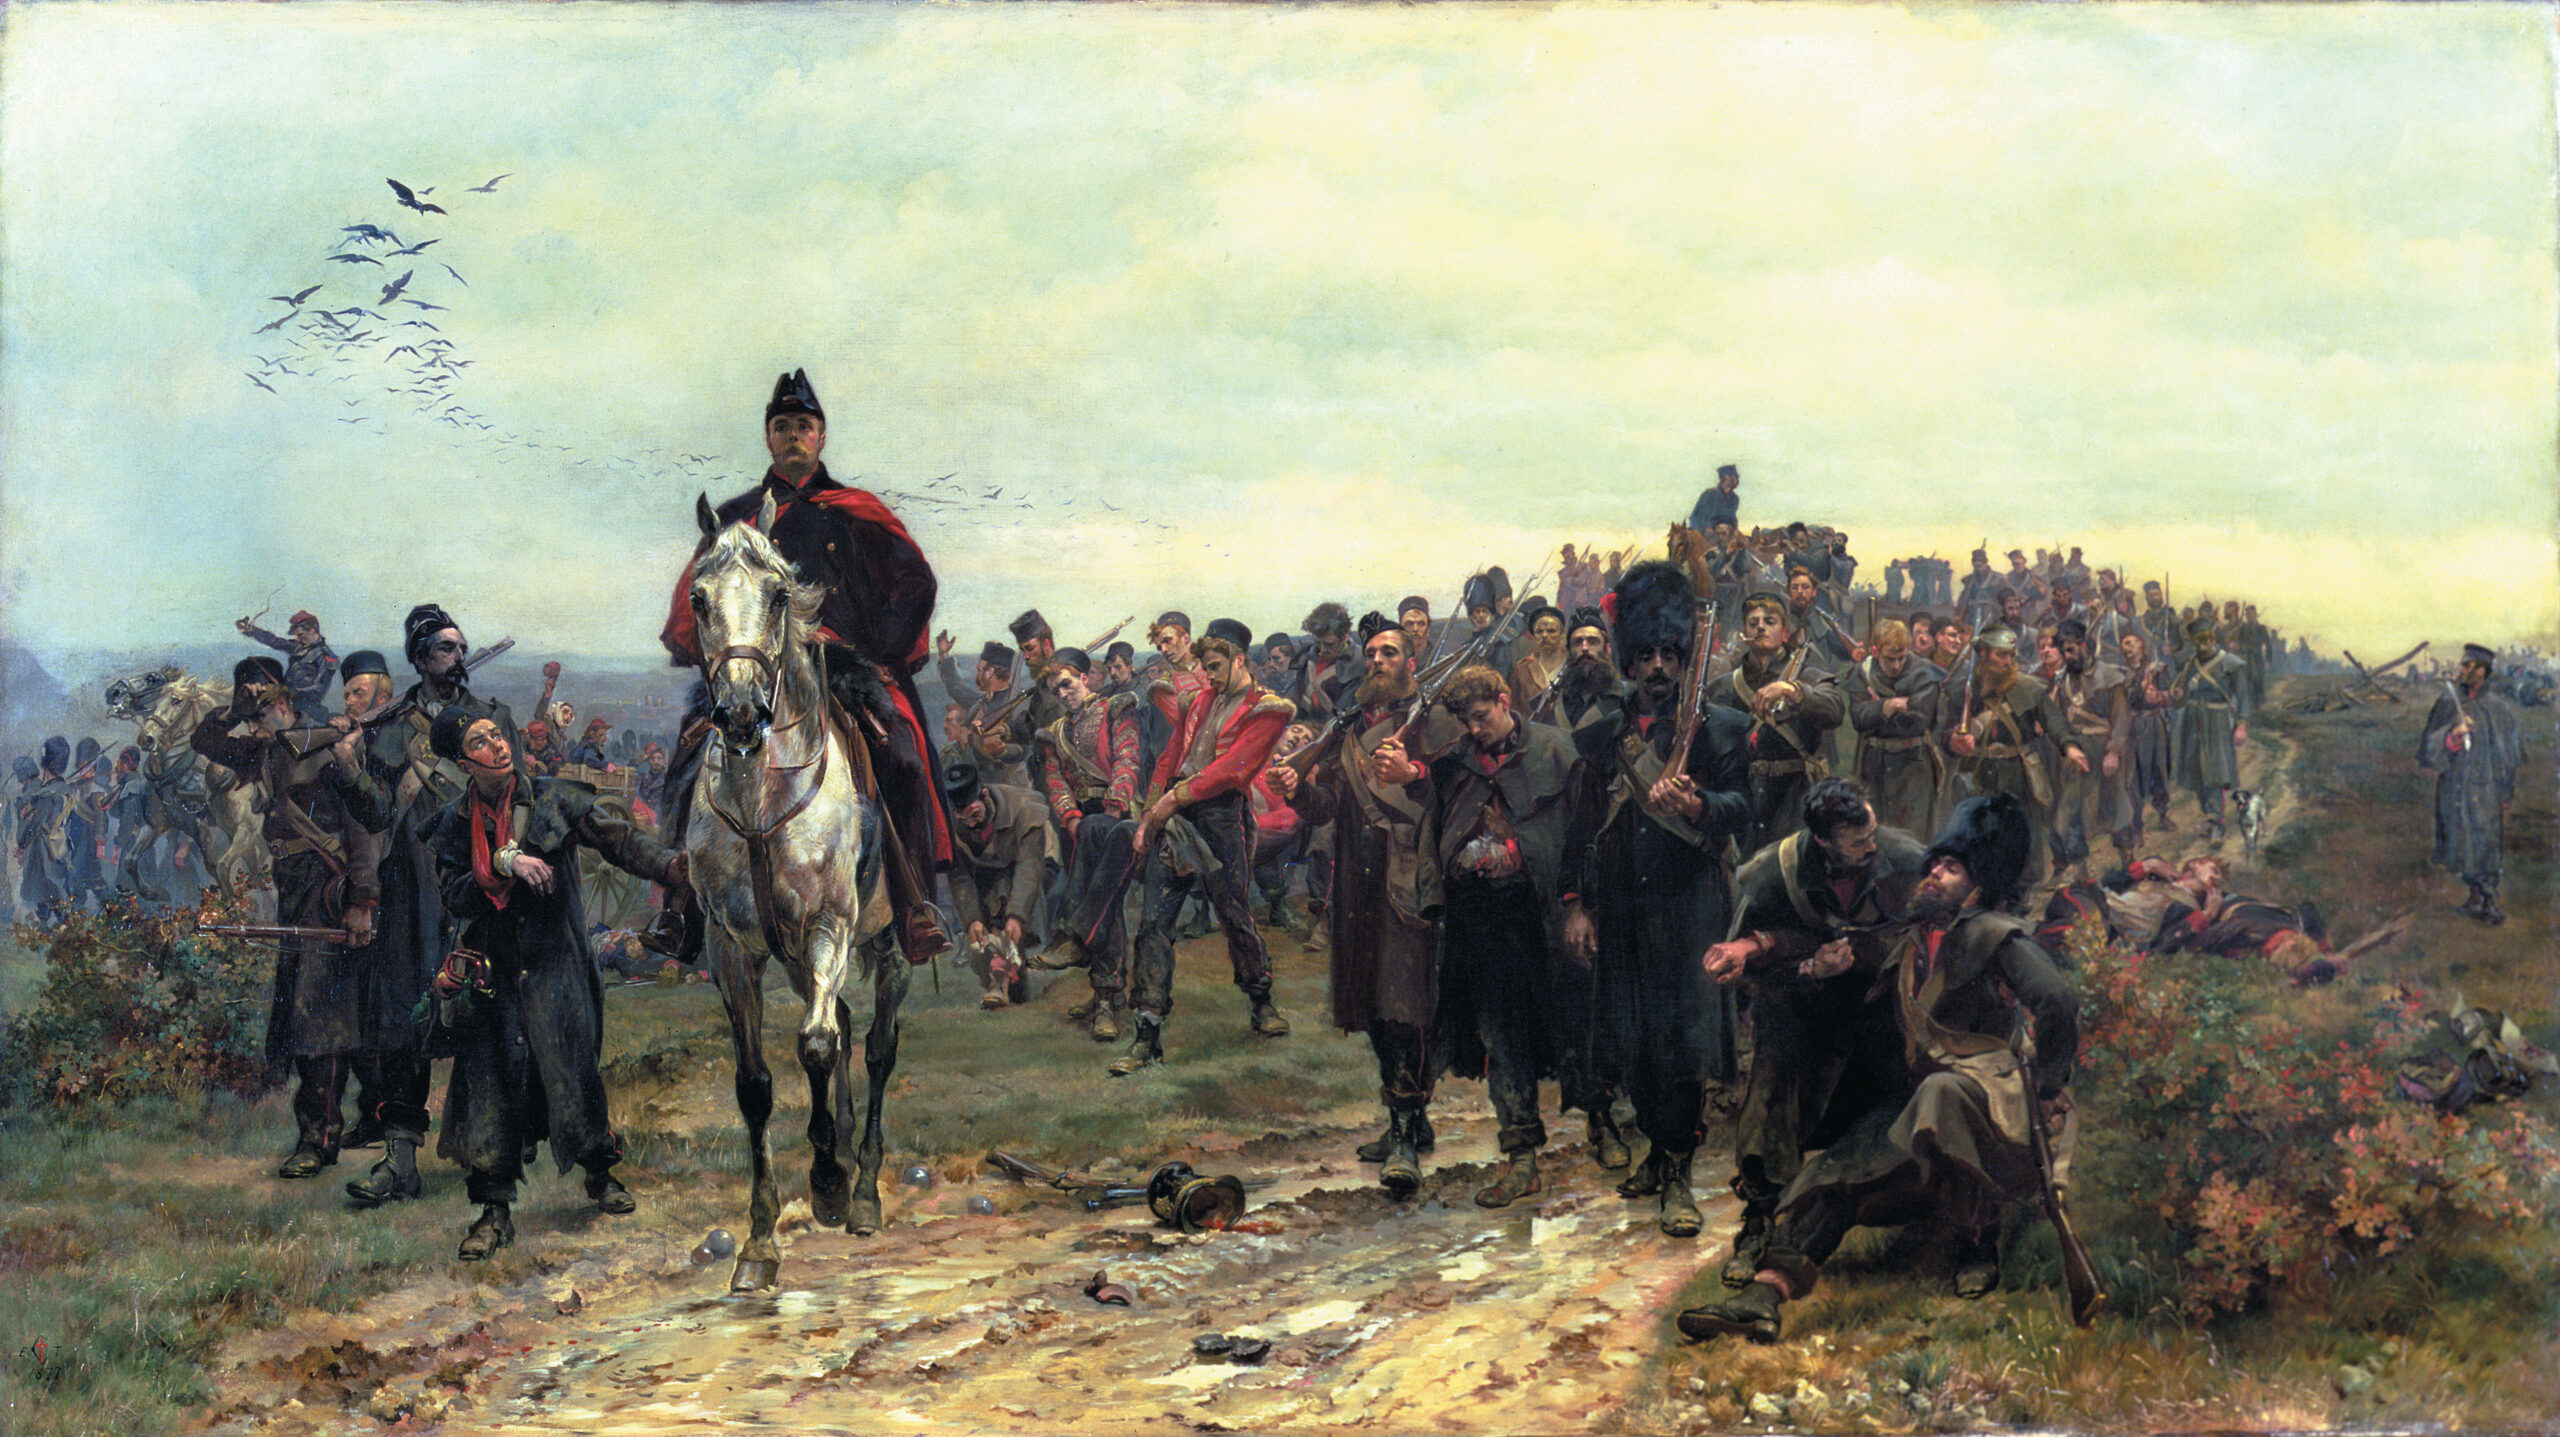 A company of exhausted and wounded members of the English Coldstream Guards and 20th East Devonshire Regiment stagger down from the heights of Inkerman in this 1877 painting, The Return From Inkerman, by Lady Elizabeth Thompson Butler.